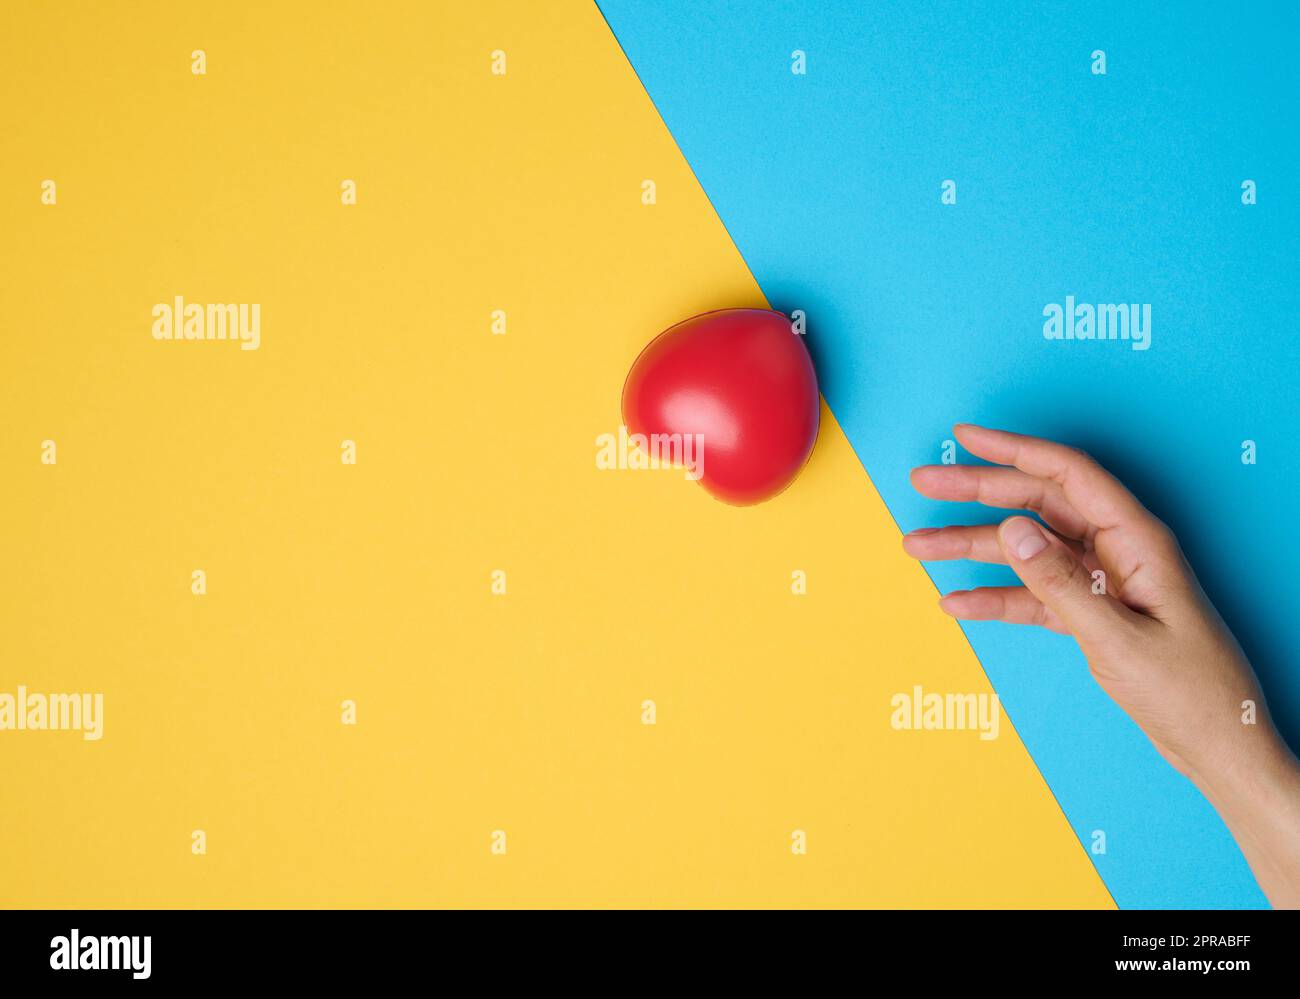 Red heart and a woman's hand reaches for it on a blue-yellow background Stock Photo